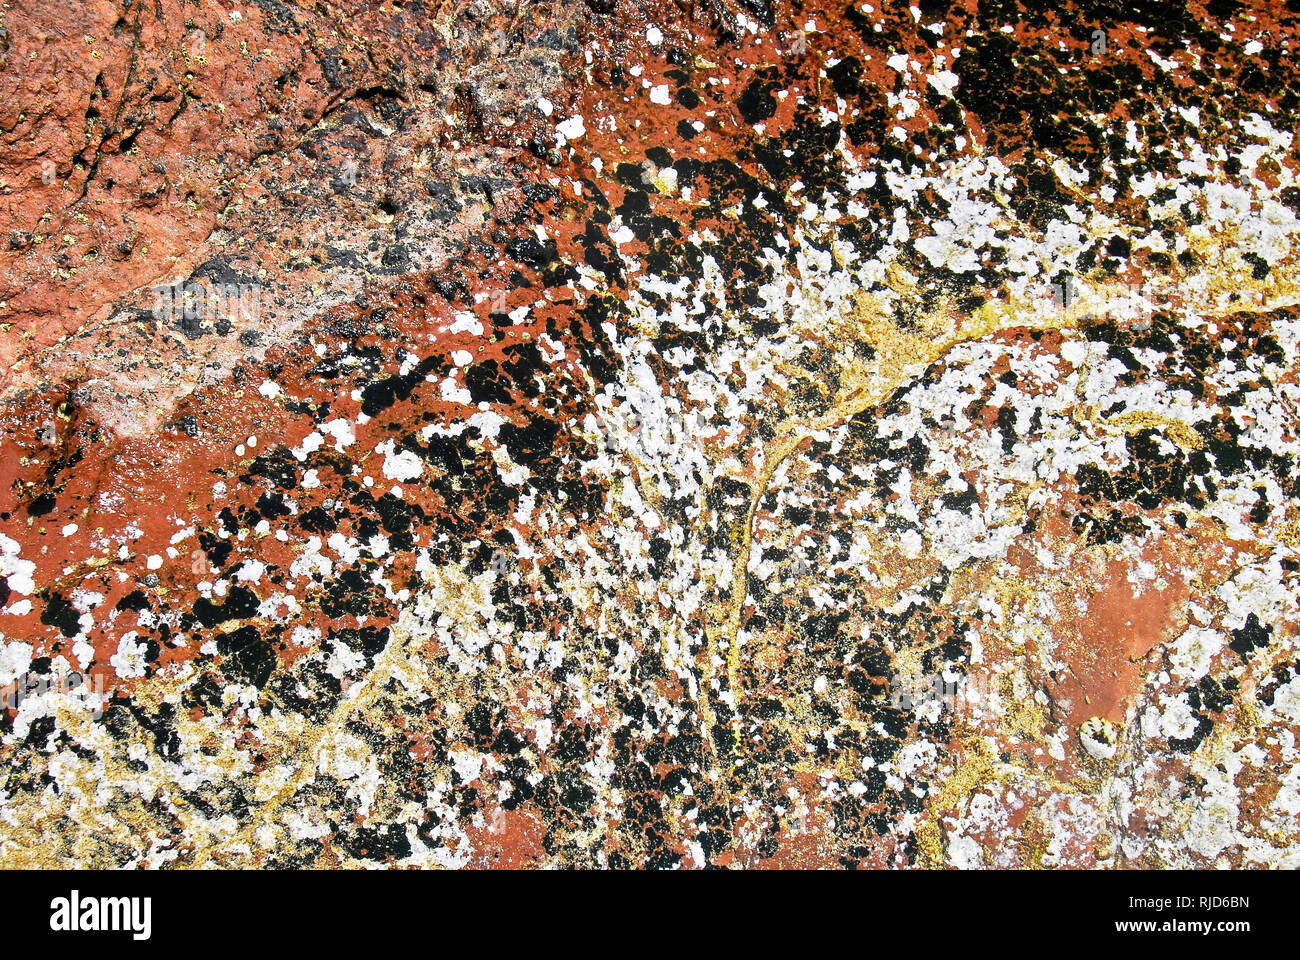 Multicolored lichens growing on red rocks, seen in Abra Province, Philippines Stock Photo